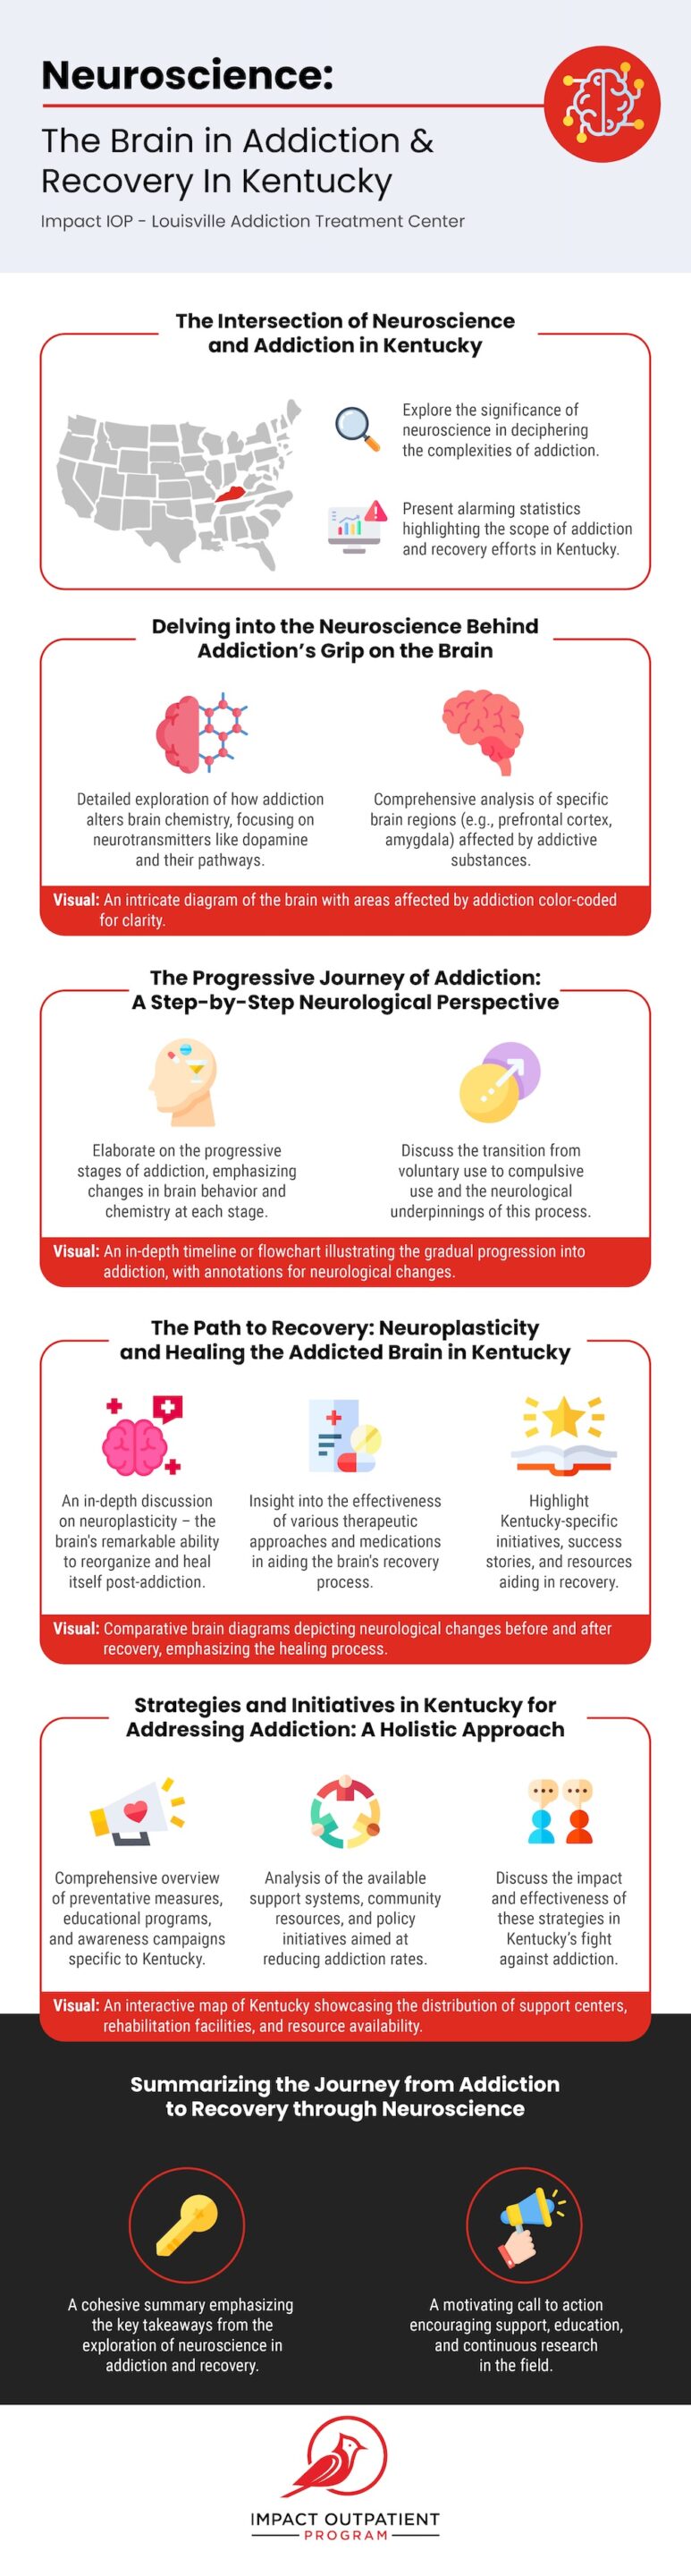 Neuroscience-The Brain in Addiction and Recovery In Kentucky - Infographic